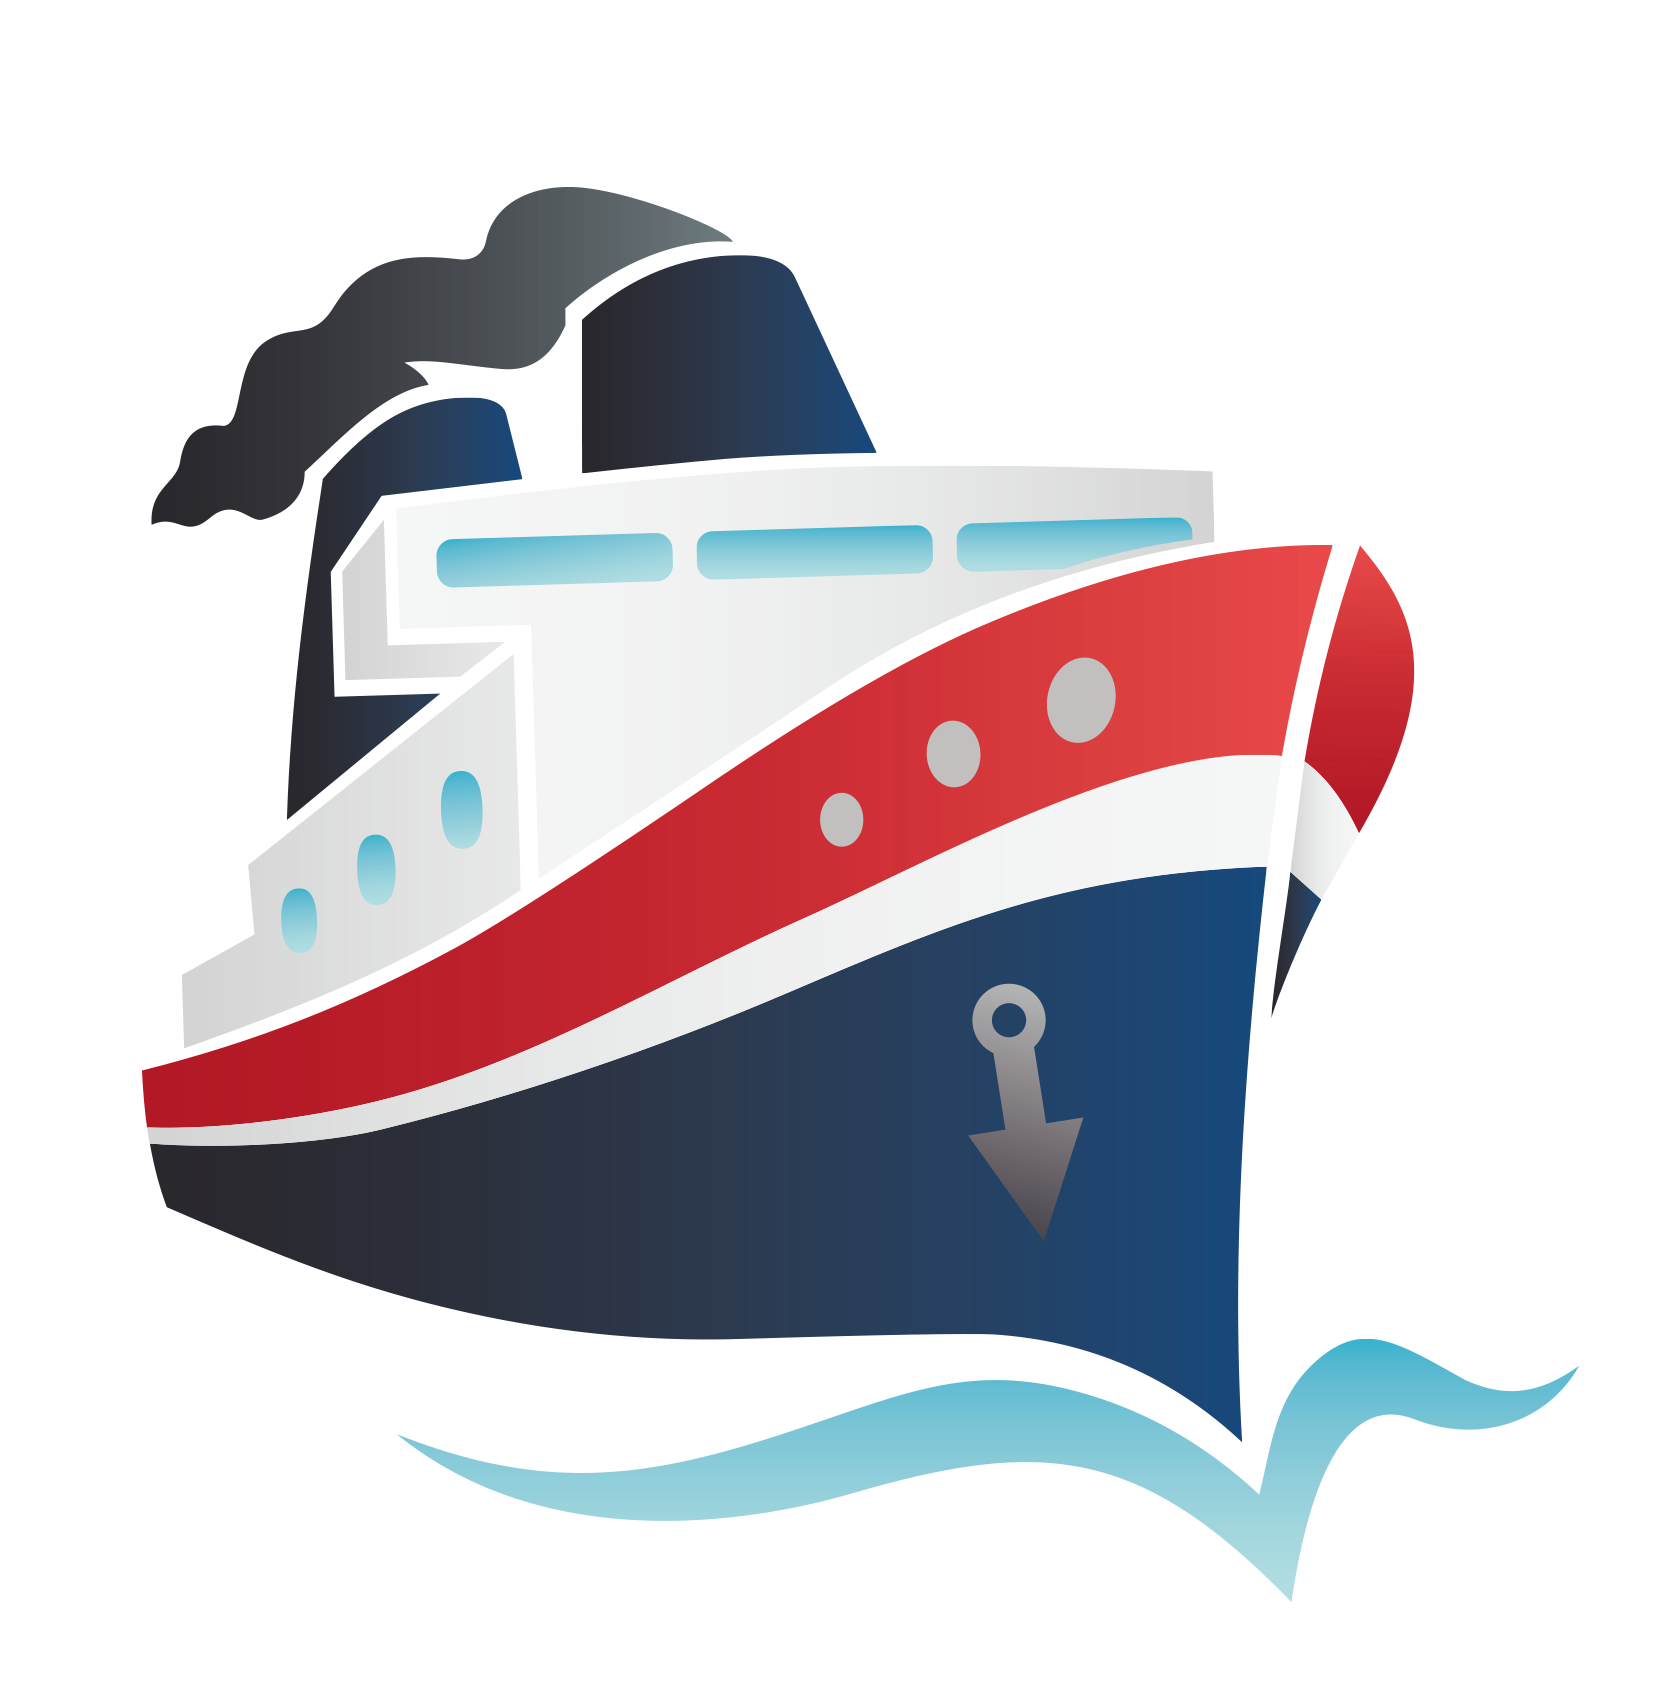 Picture Ship Cartoon Boat Free HD Image Clipart